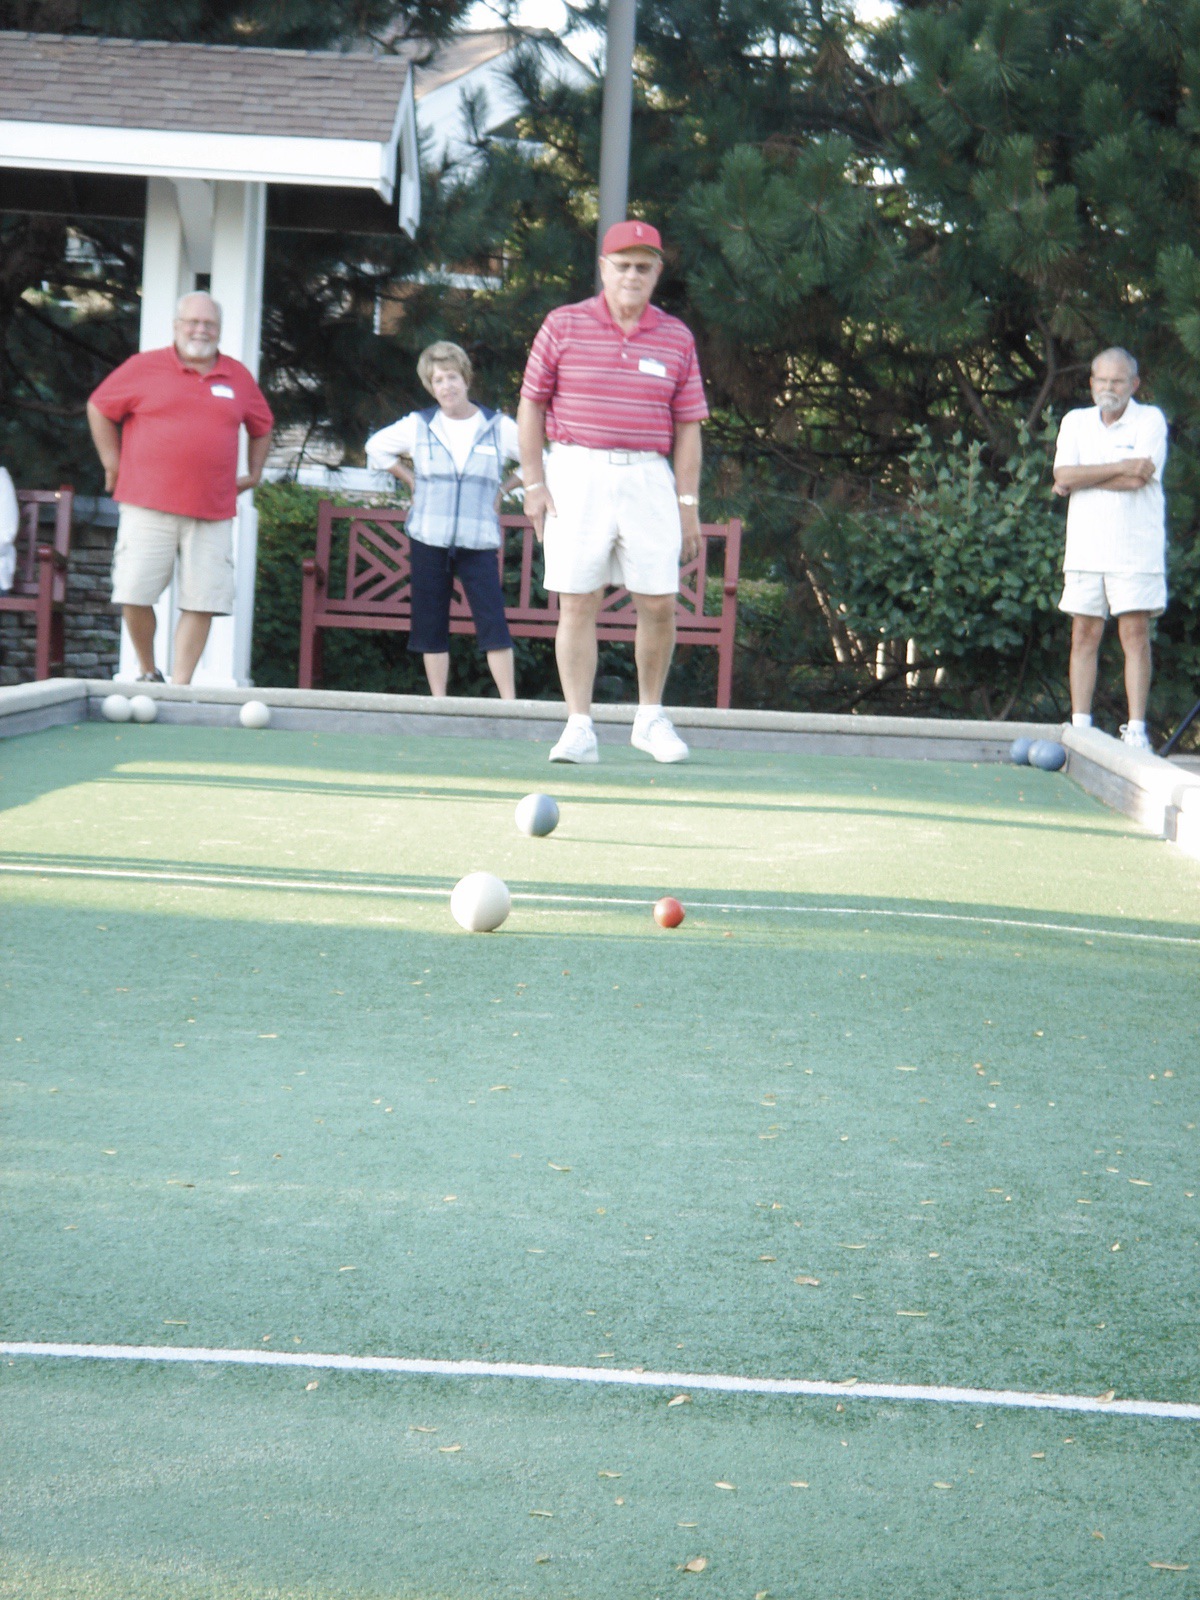 On a warm summer day, members of Sun City’s bocce club compete against one another during a tournament and watch closely as the balls roll across the court. Bocce Club has been available to Sun City residents every summer from June to July. (Photo provided)